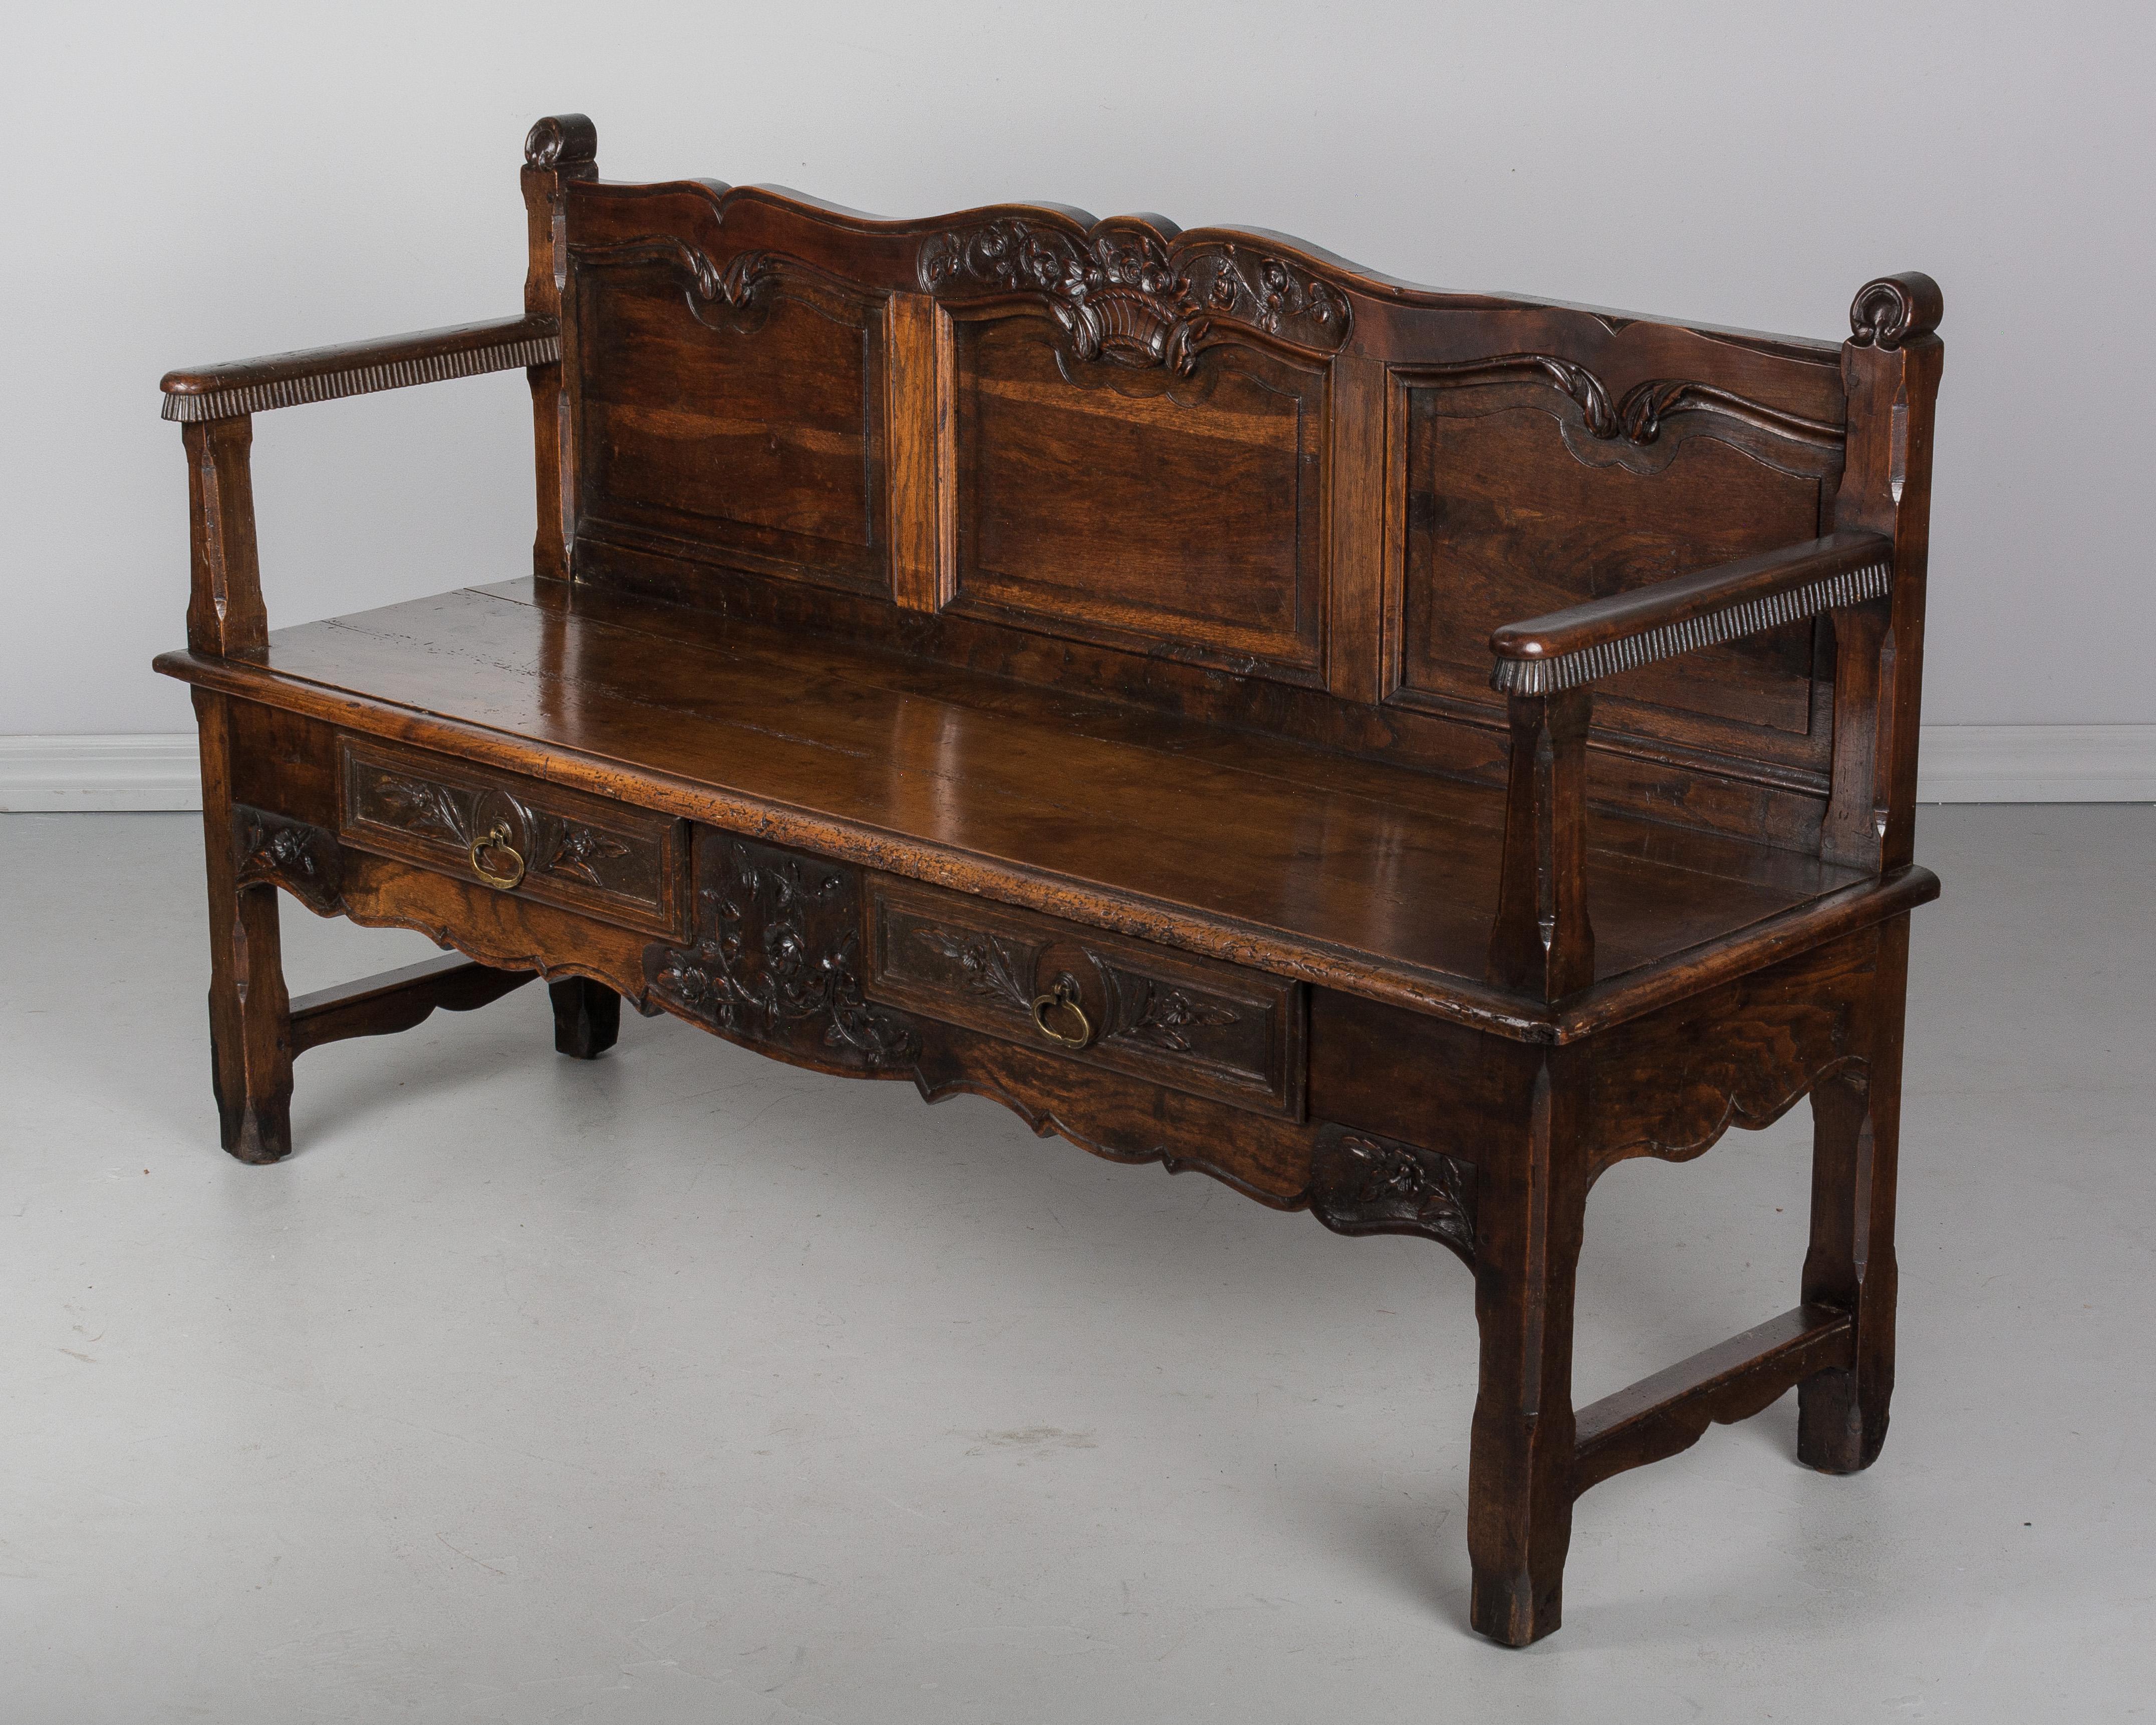 An early 19th century French Provencal bench made of oak and cherry woods with beautiful hand-carved floral decoration. Under the seat are two dovetailed drawers with brass pulls. Sturdy and well-crafted using pegged construction. Waxed patina. All